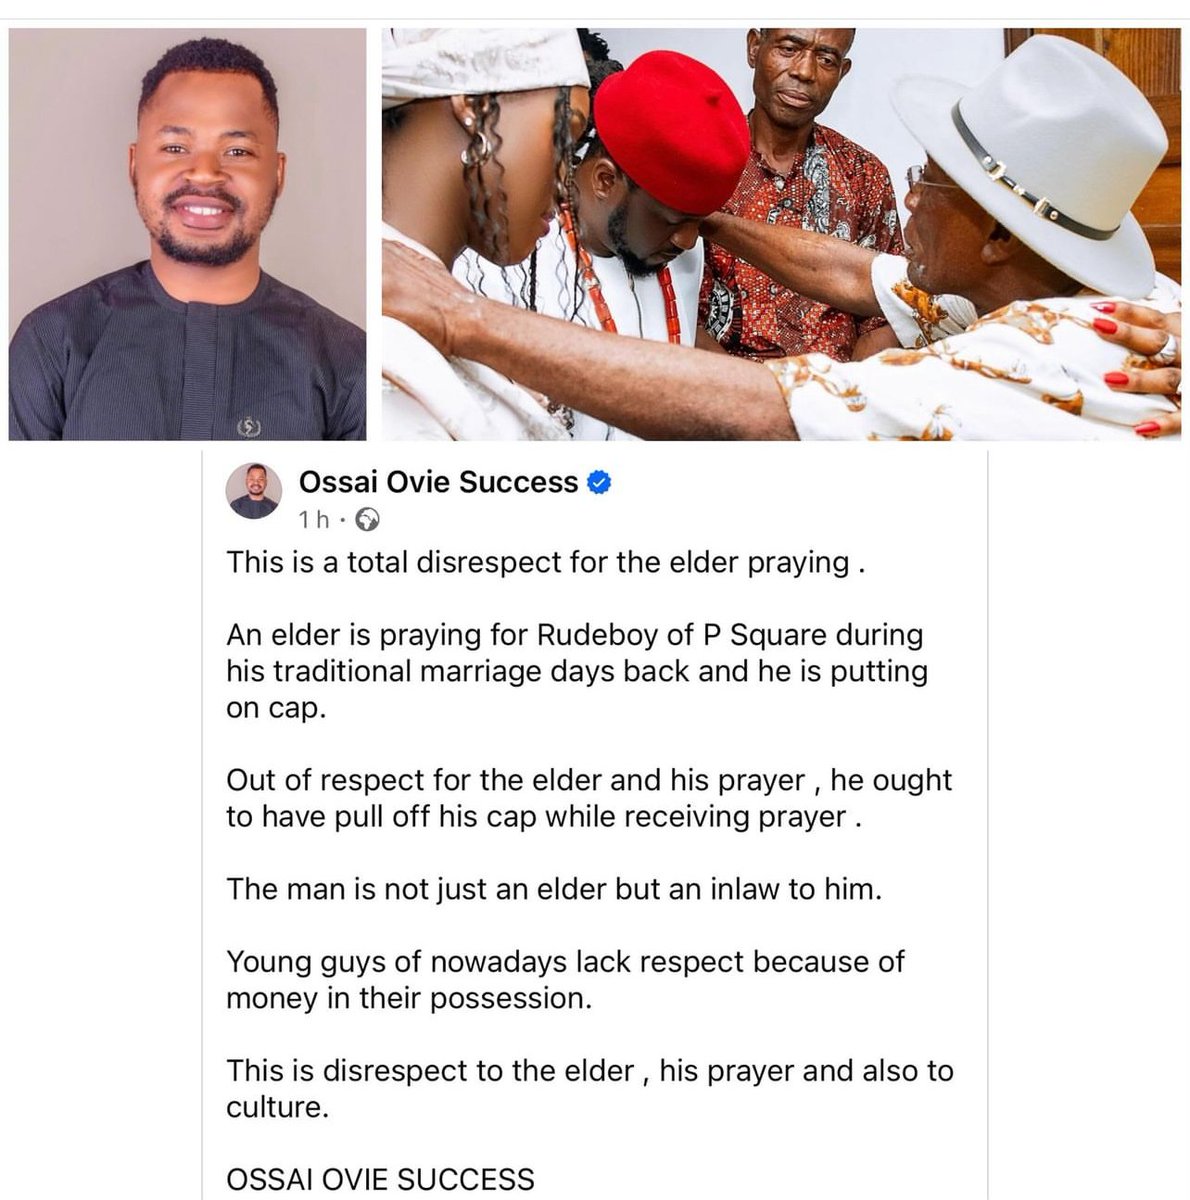 Young guys of nowadays lack respect because of money in their possession - Delta governor’s aide knocks Paul Okoye for wearing a cap while being prayed for by an elder at his wedding introduction.